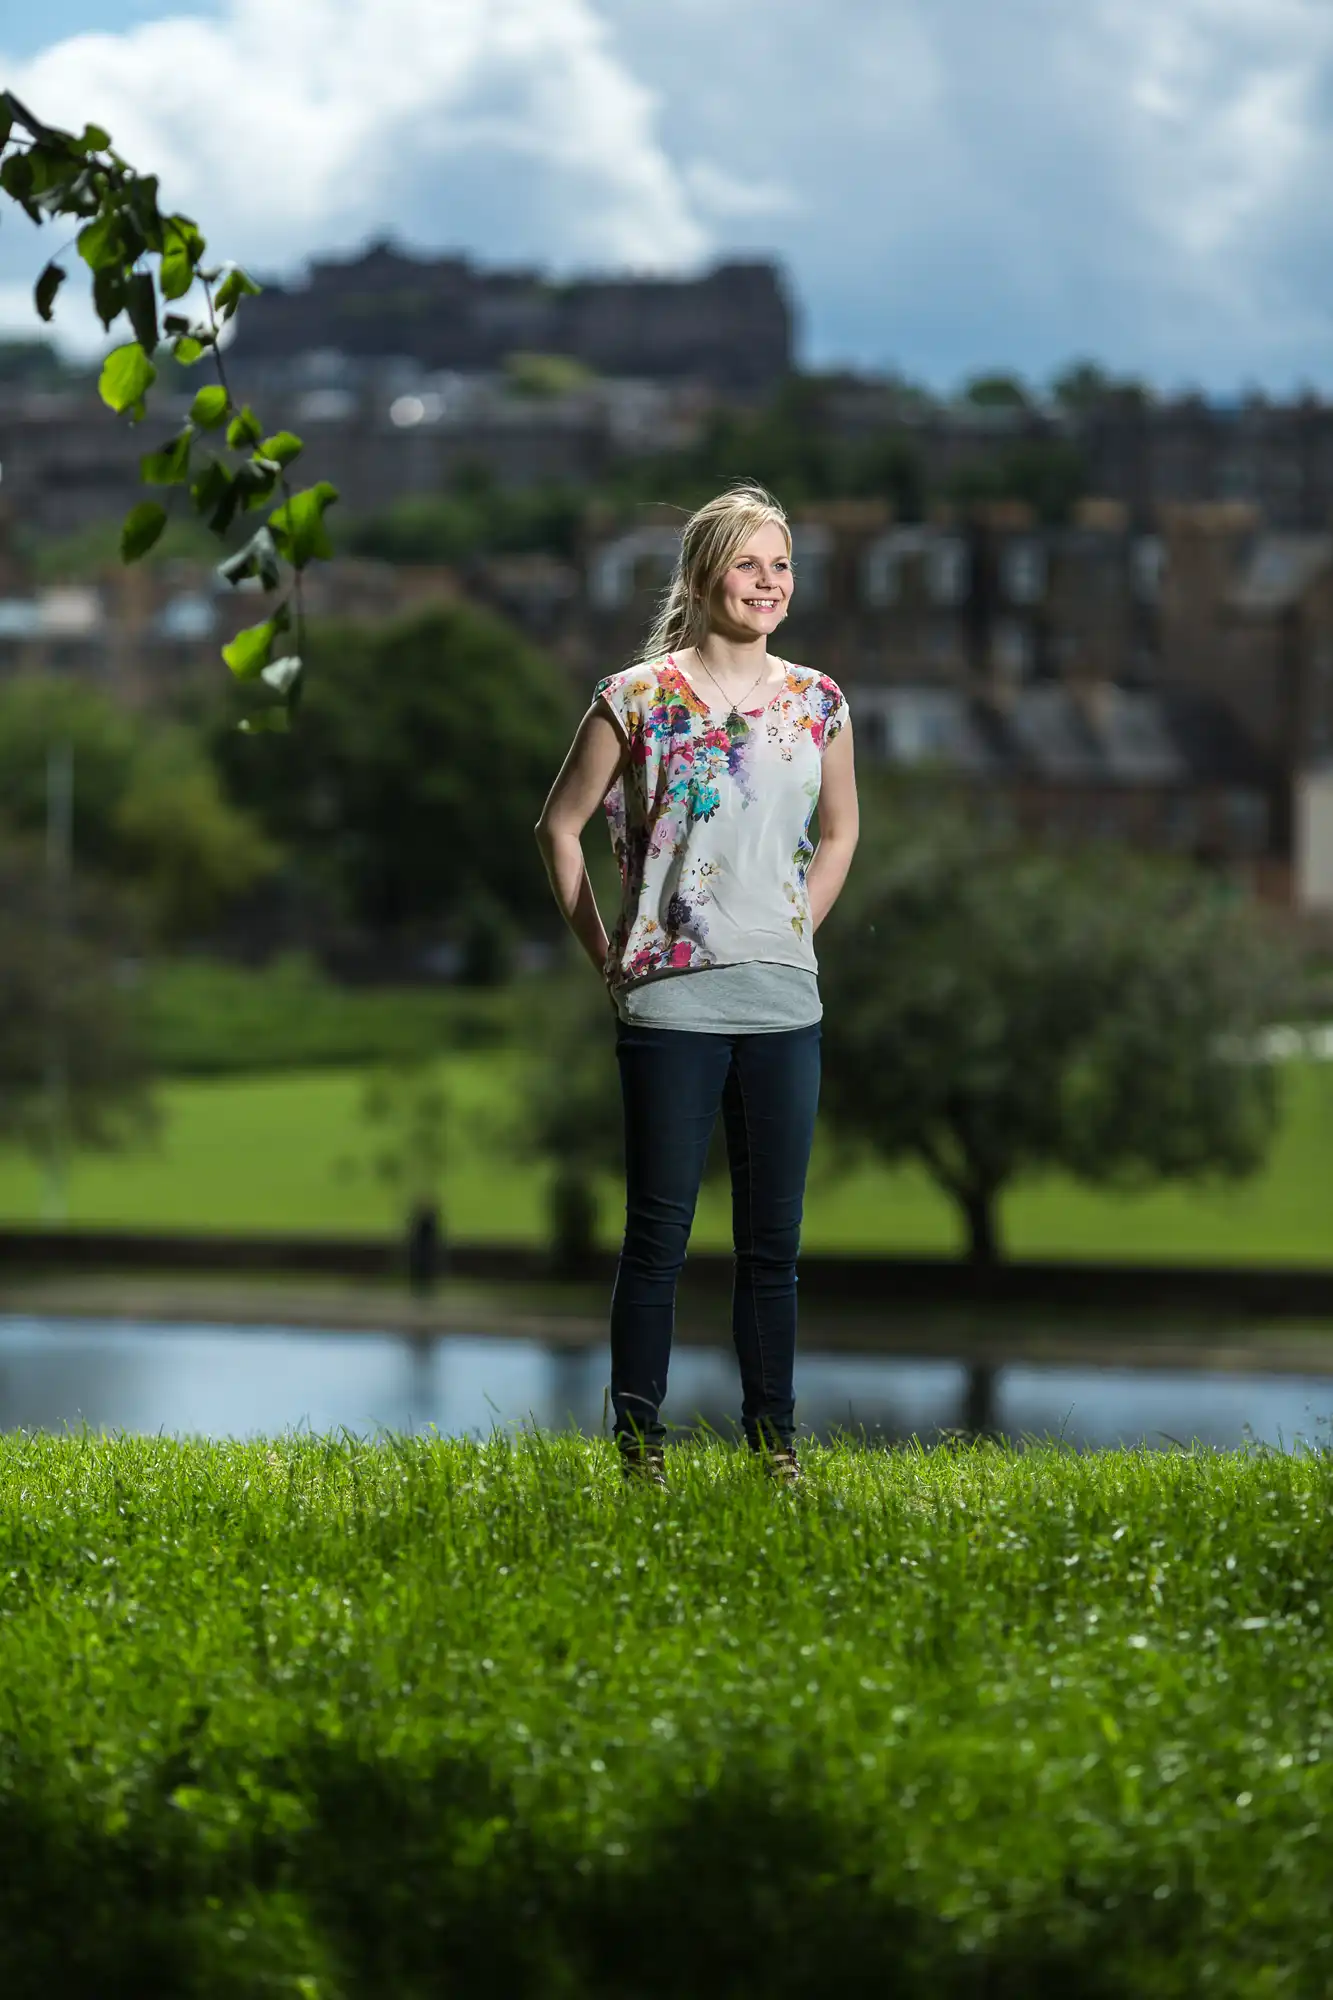 Woman standing on grass with a scenic cityscape in the background, wearing a floral top and jeans, smiling.